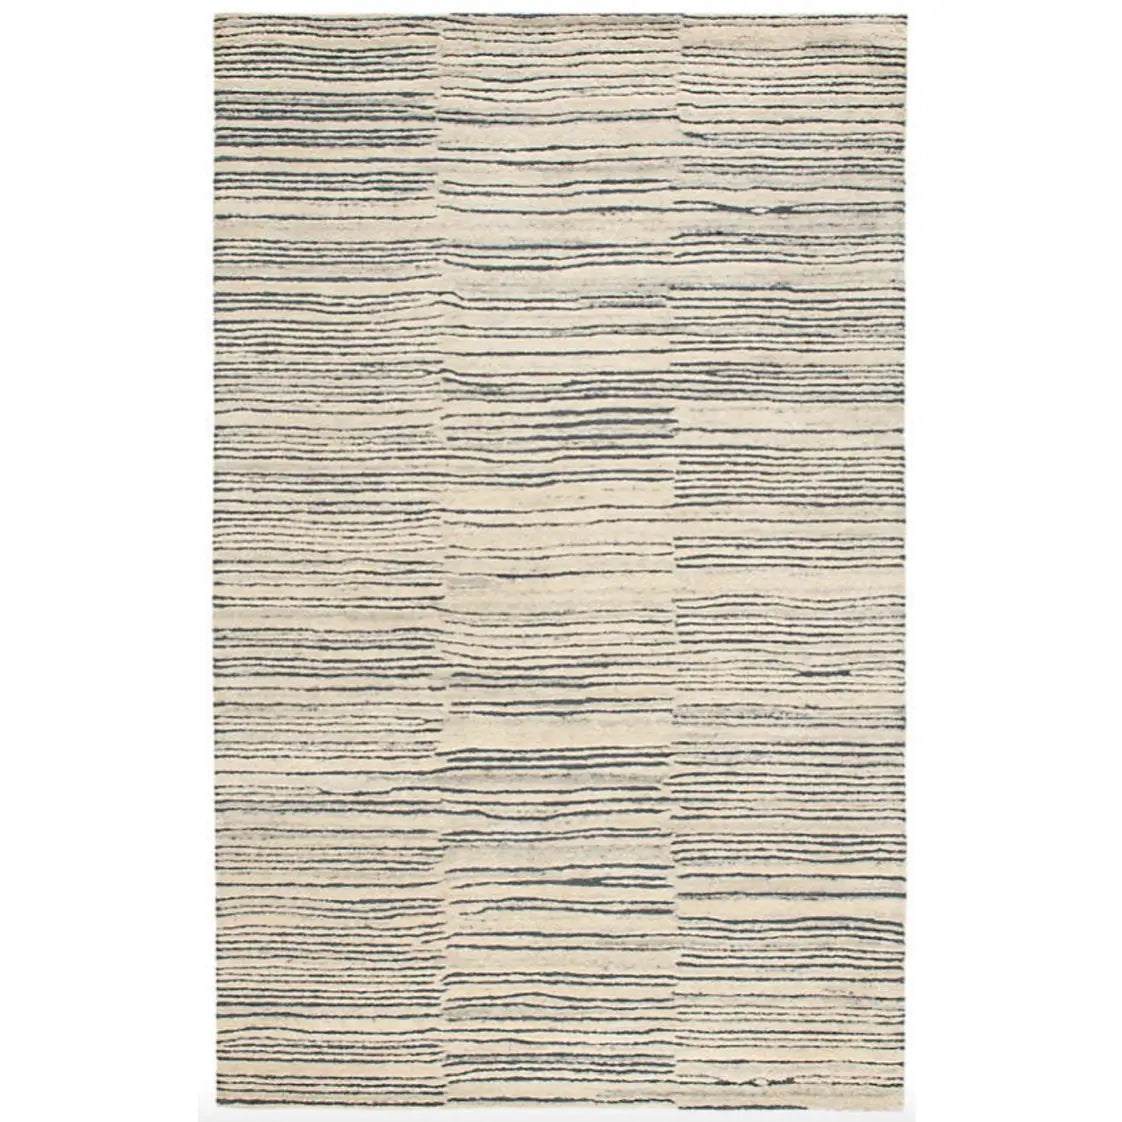 Avery Everglade Tufted Wool Rug - Home Smith